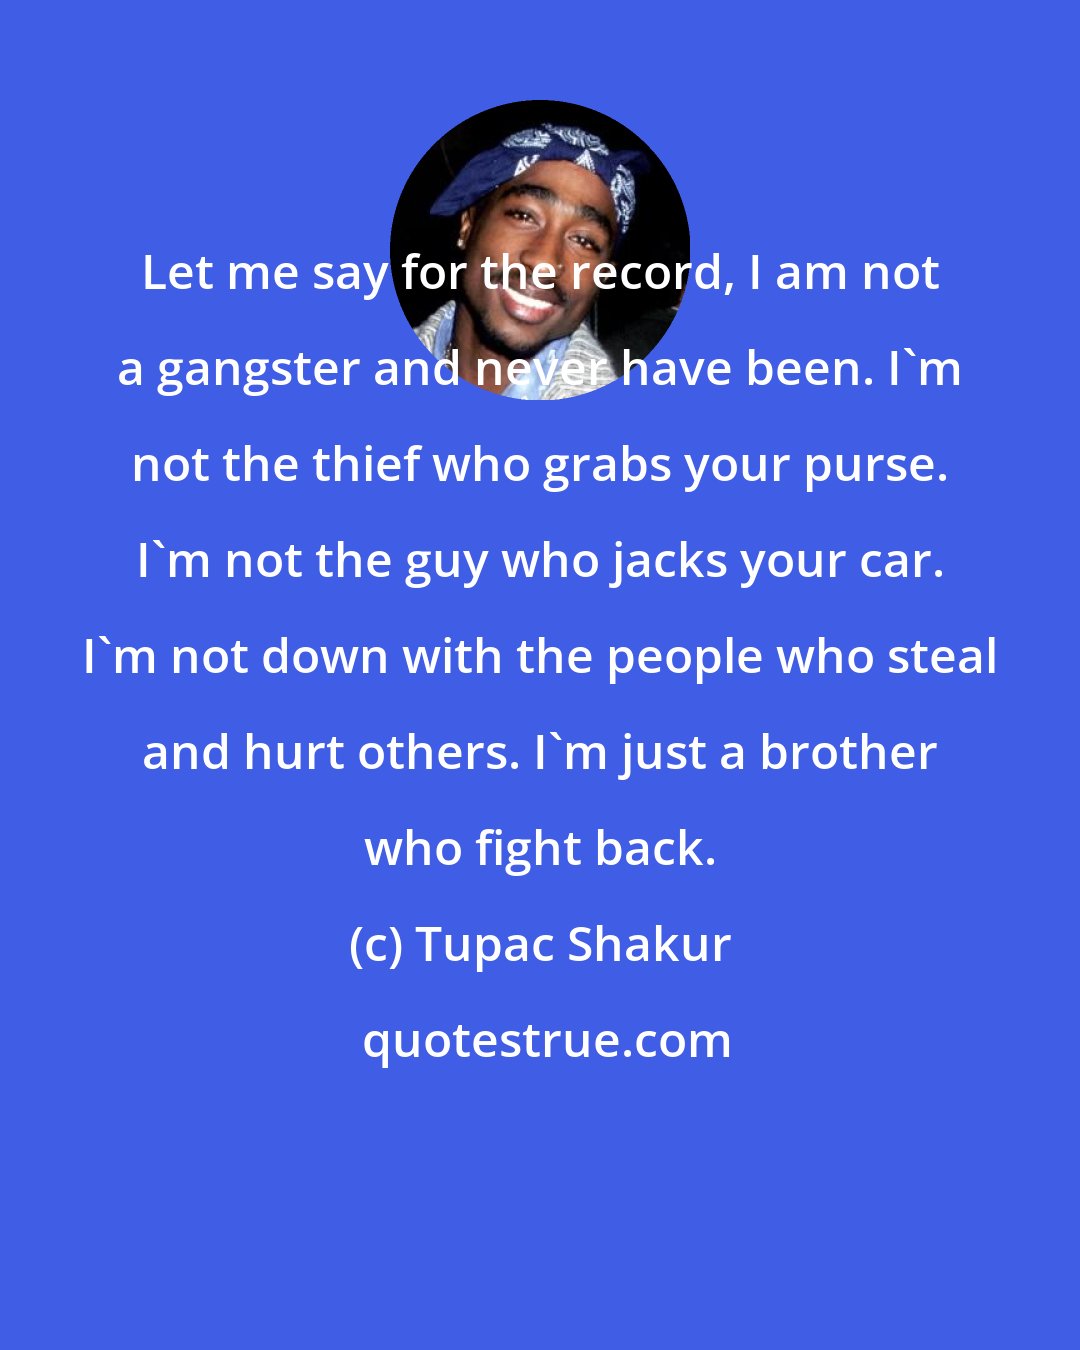 Tupac Shakur: Let me say for the record, I am not a gangster and never have been. I`m not the thief who grabs your purse. I`m not the guy who jacks your car. I`m not down with the people who steal and hurt others. I`m just a brother who fight back.